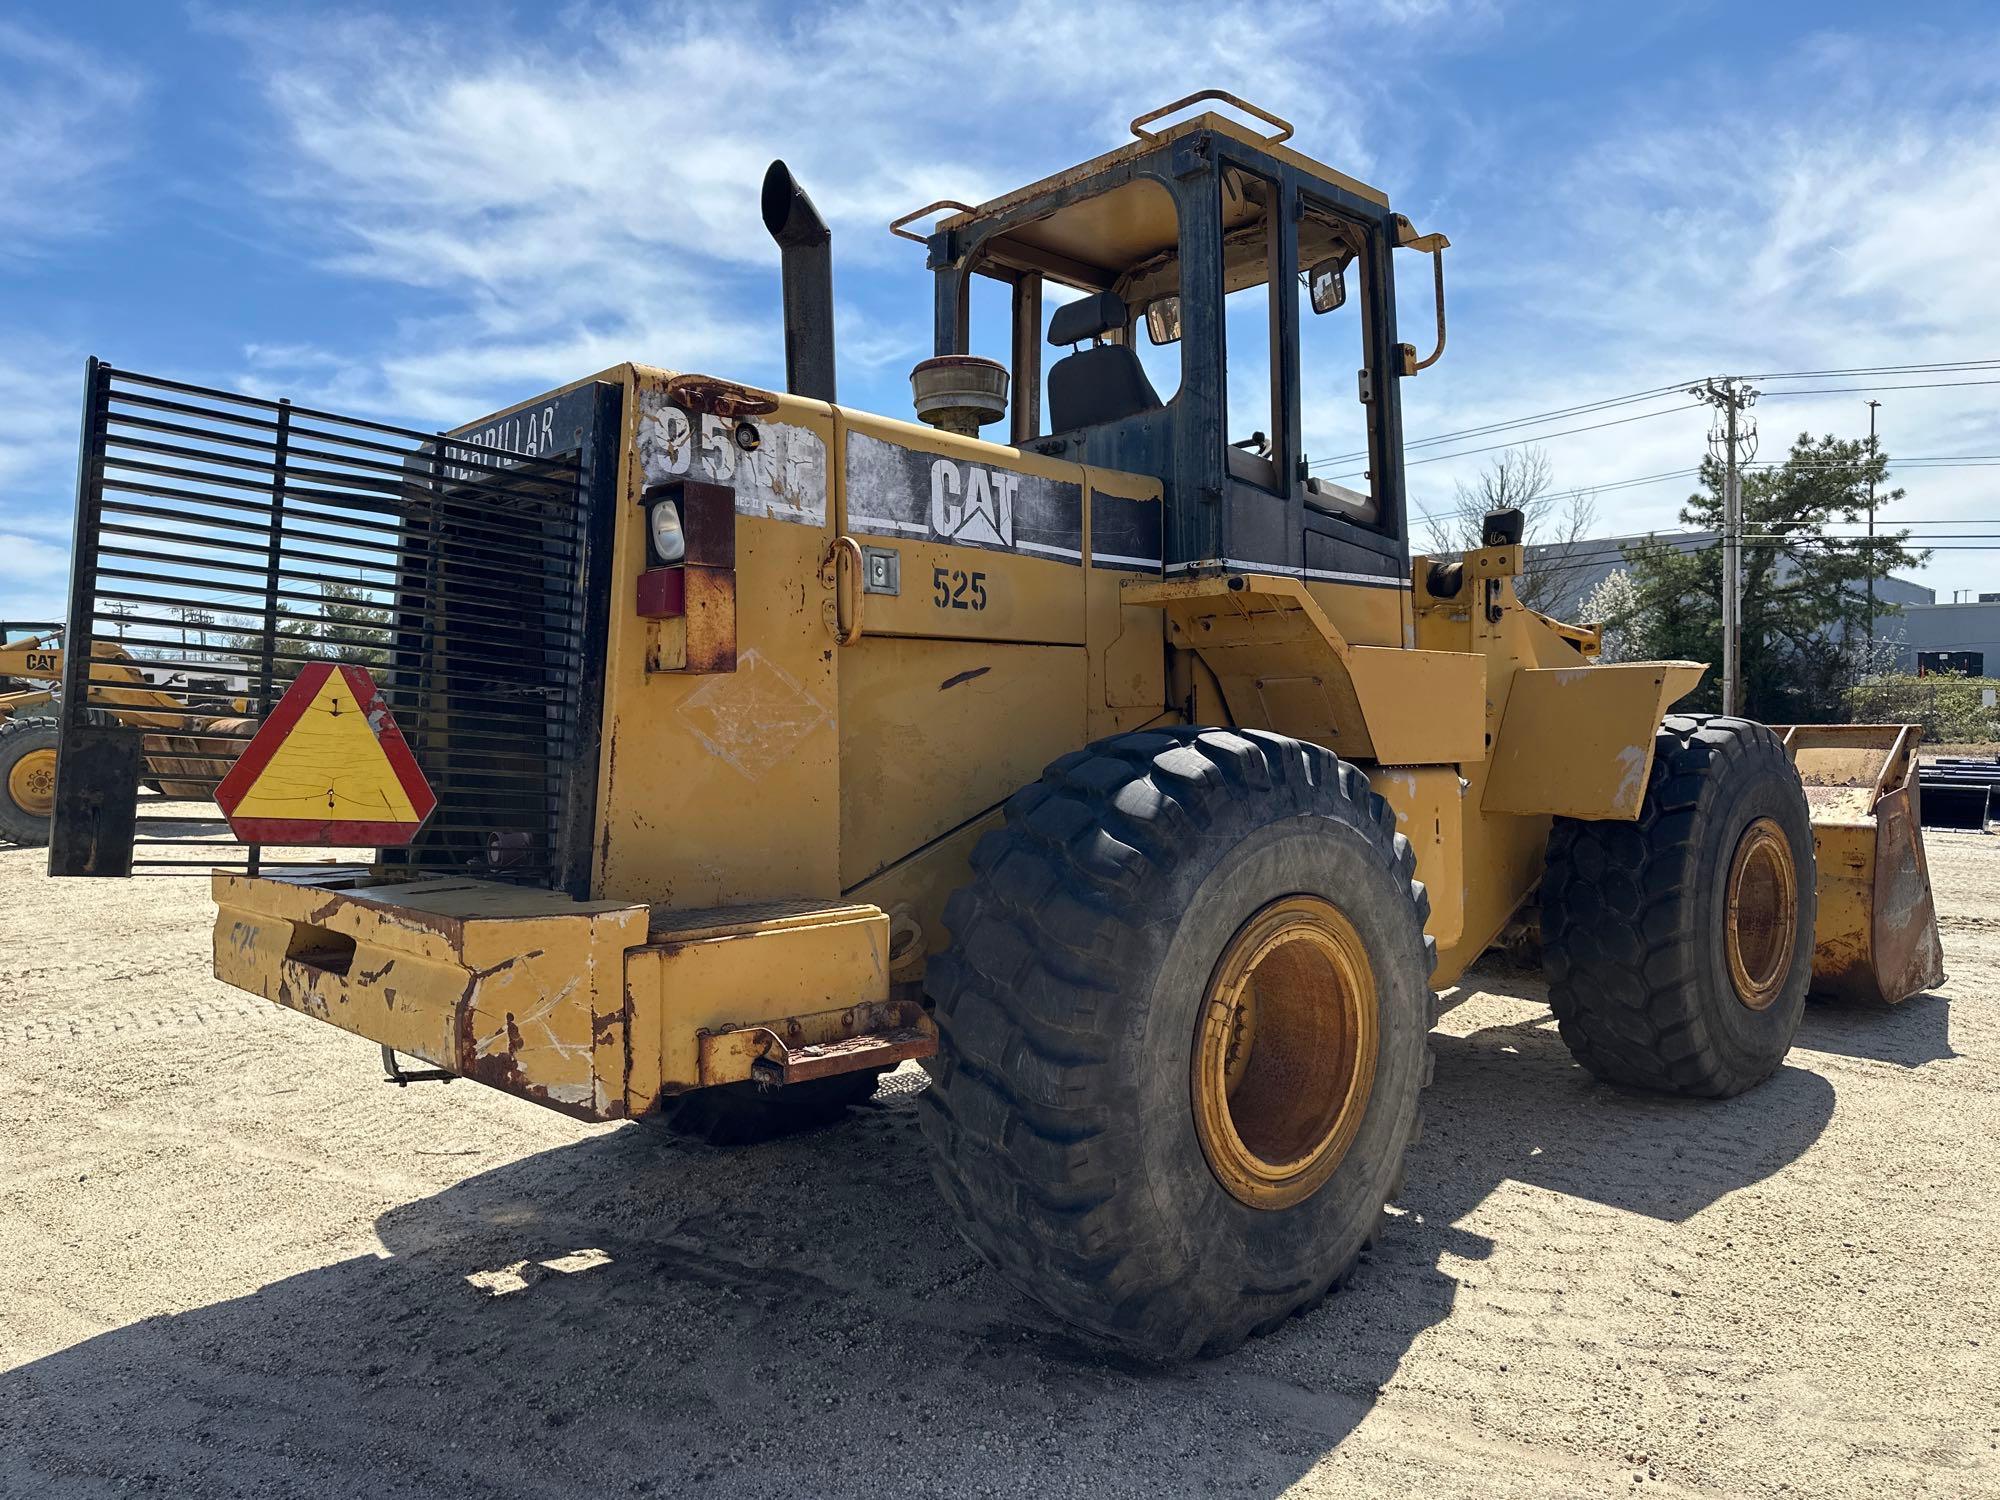 CAT 950F RUBBER TIRED LOADER SN:5SK01968 powered by Cat diesel engine, equipped with OROPS, pin on